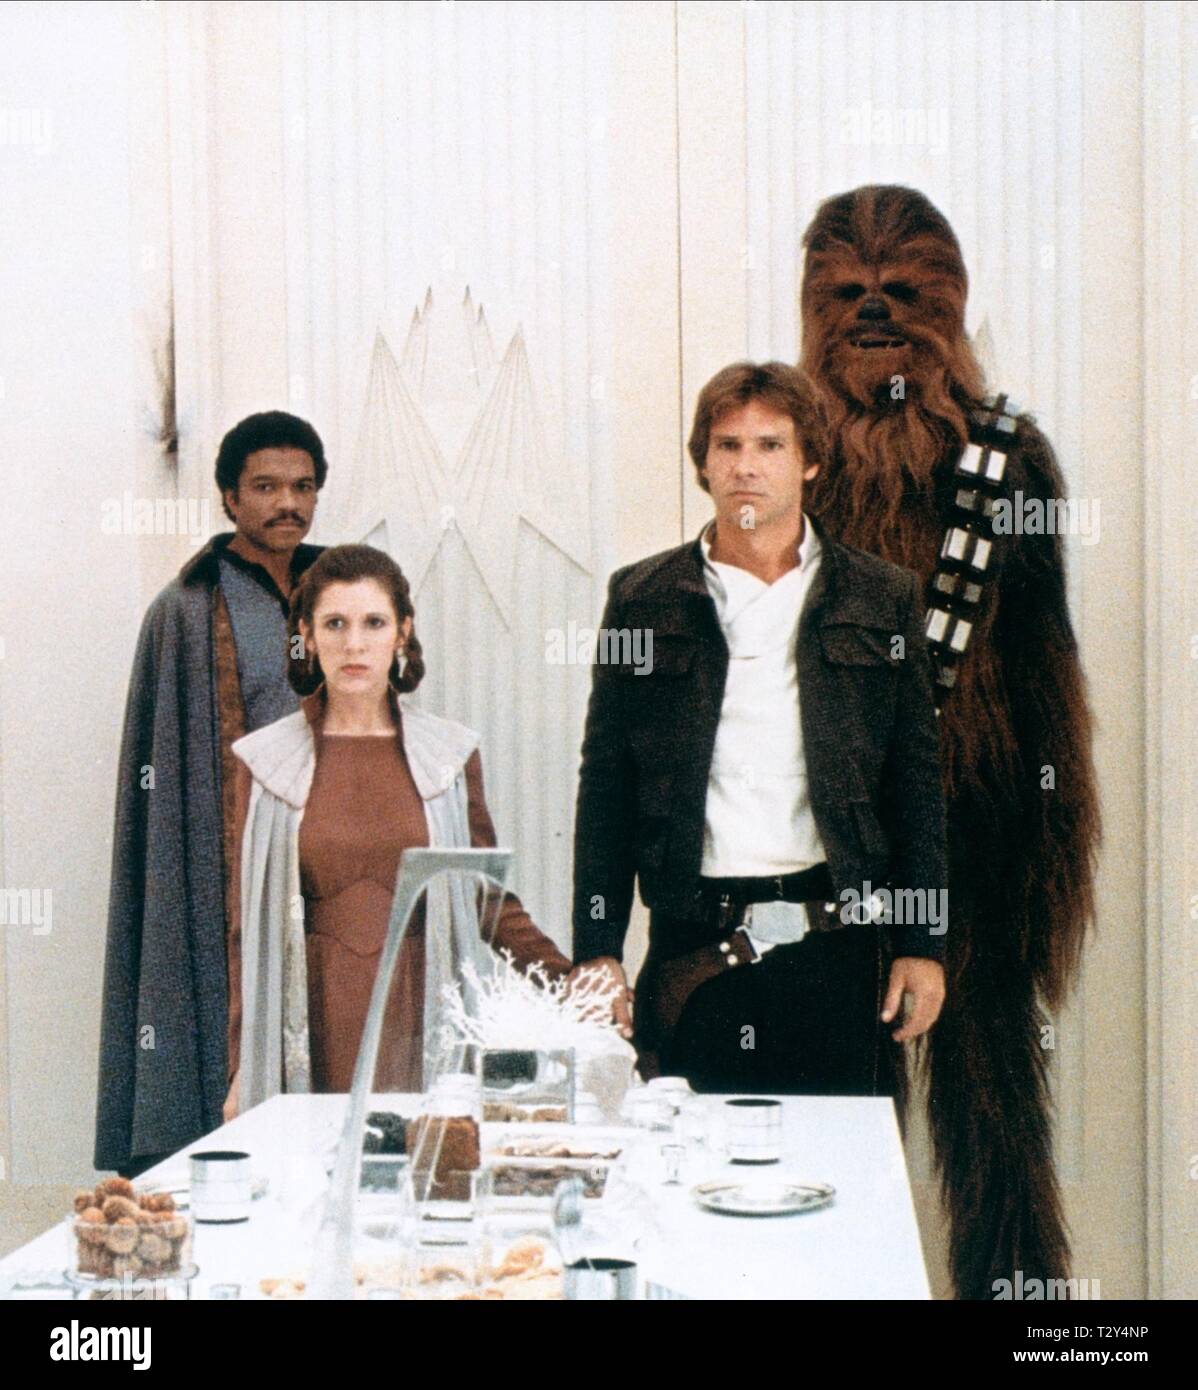 STAR WARS : Episode V - L'Empire contre-attaque, Billy Dee Williams, Carrie Fisher, HARRISON FORD , PETER Mayhew, 1980 Banque D'Images